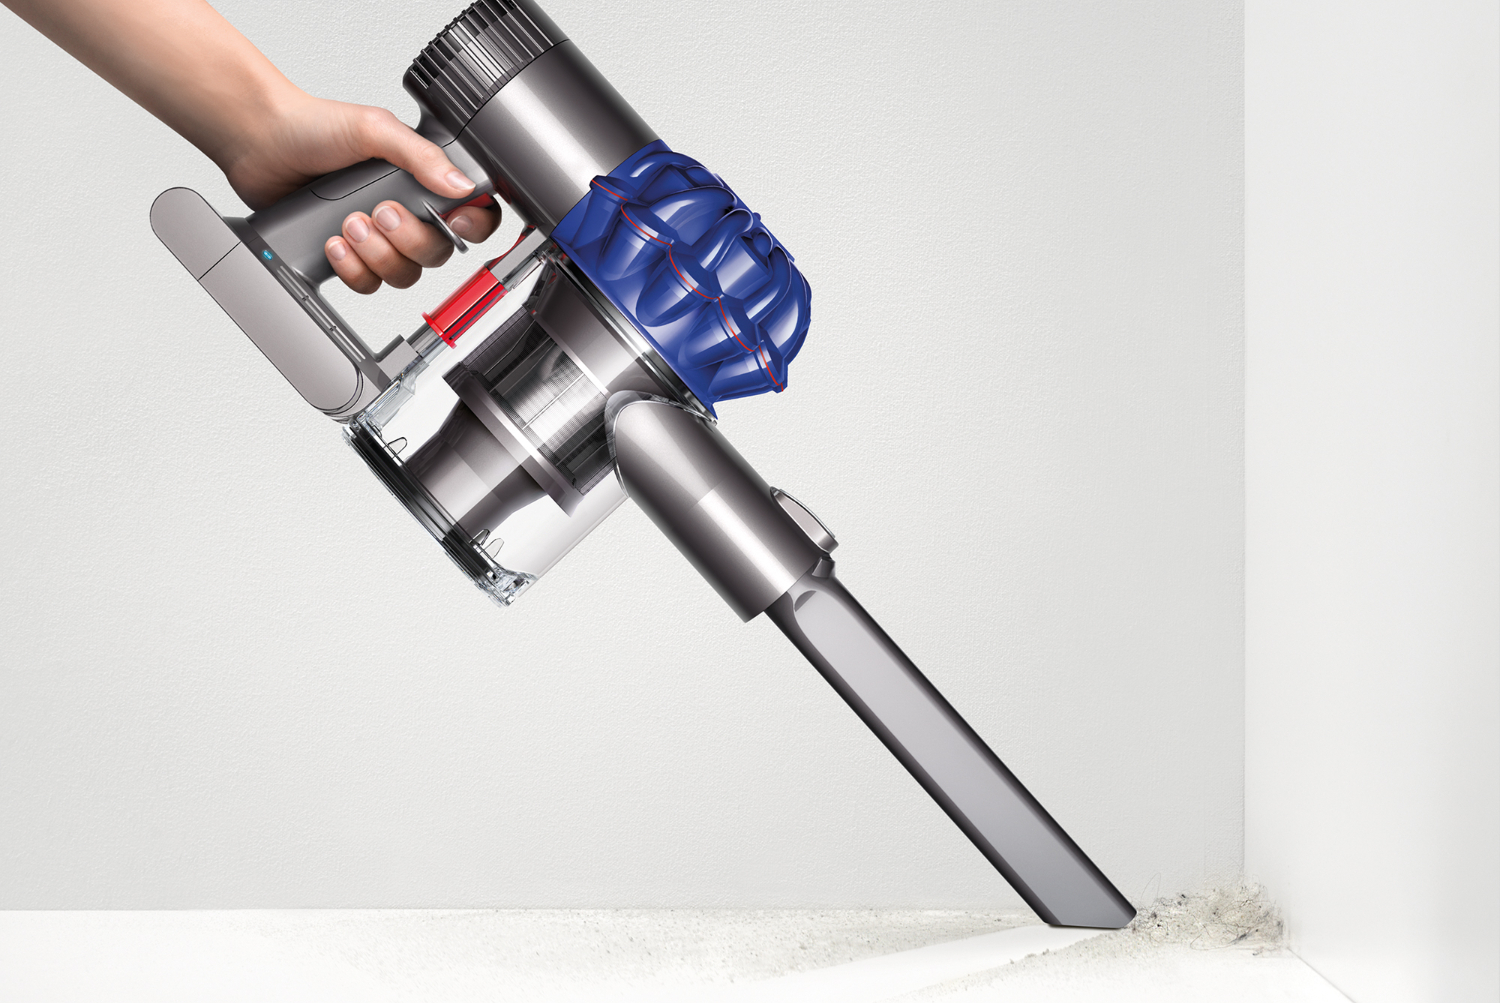 walmart knocks down prices on dyson handheld vacuums in post prime day sale 231942 01 v6 trigger origin vacuum 2